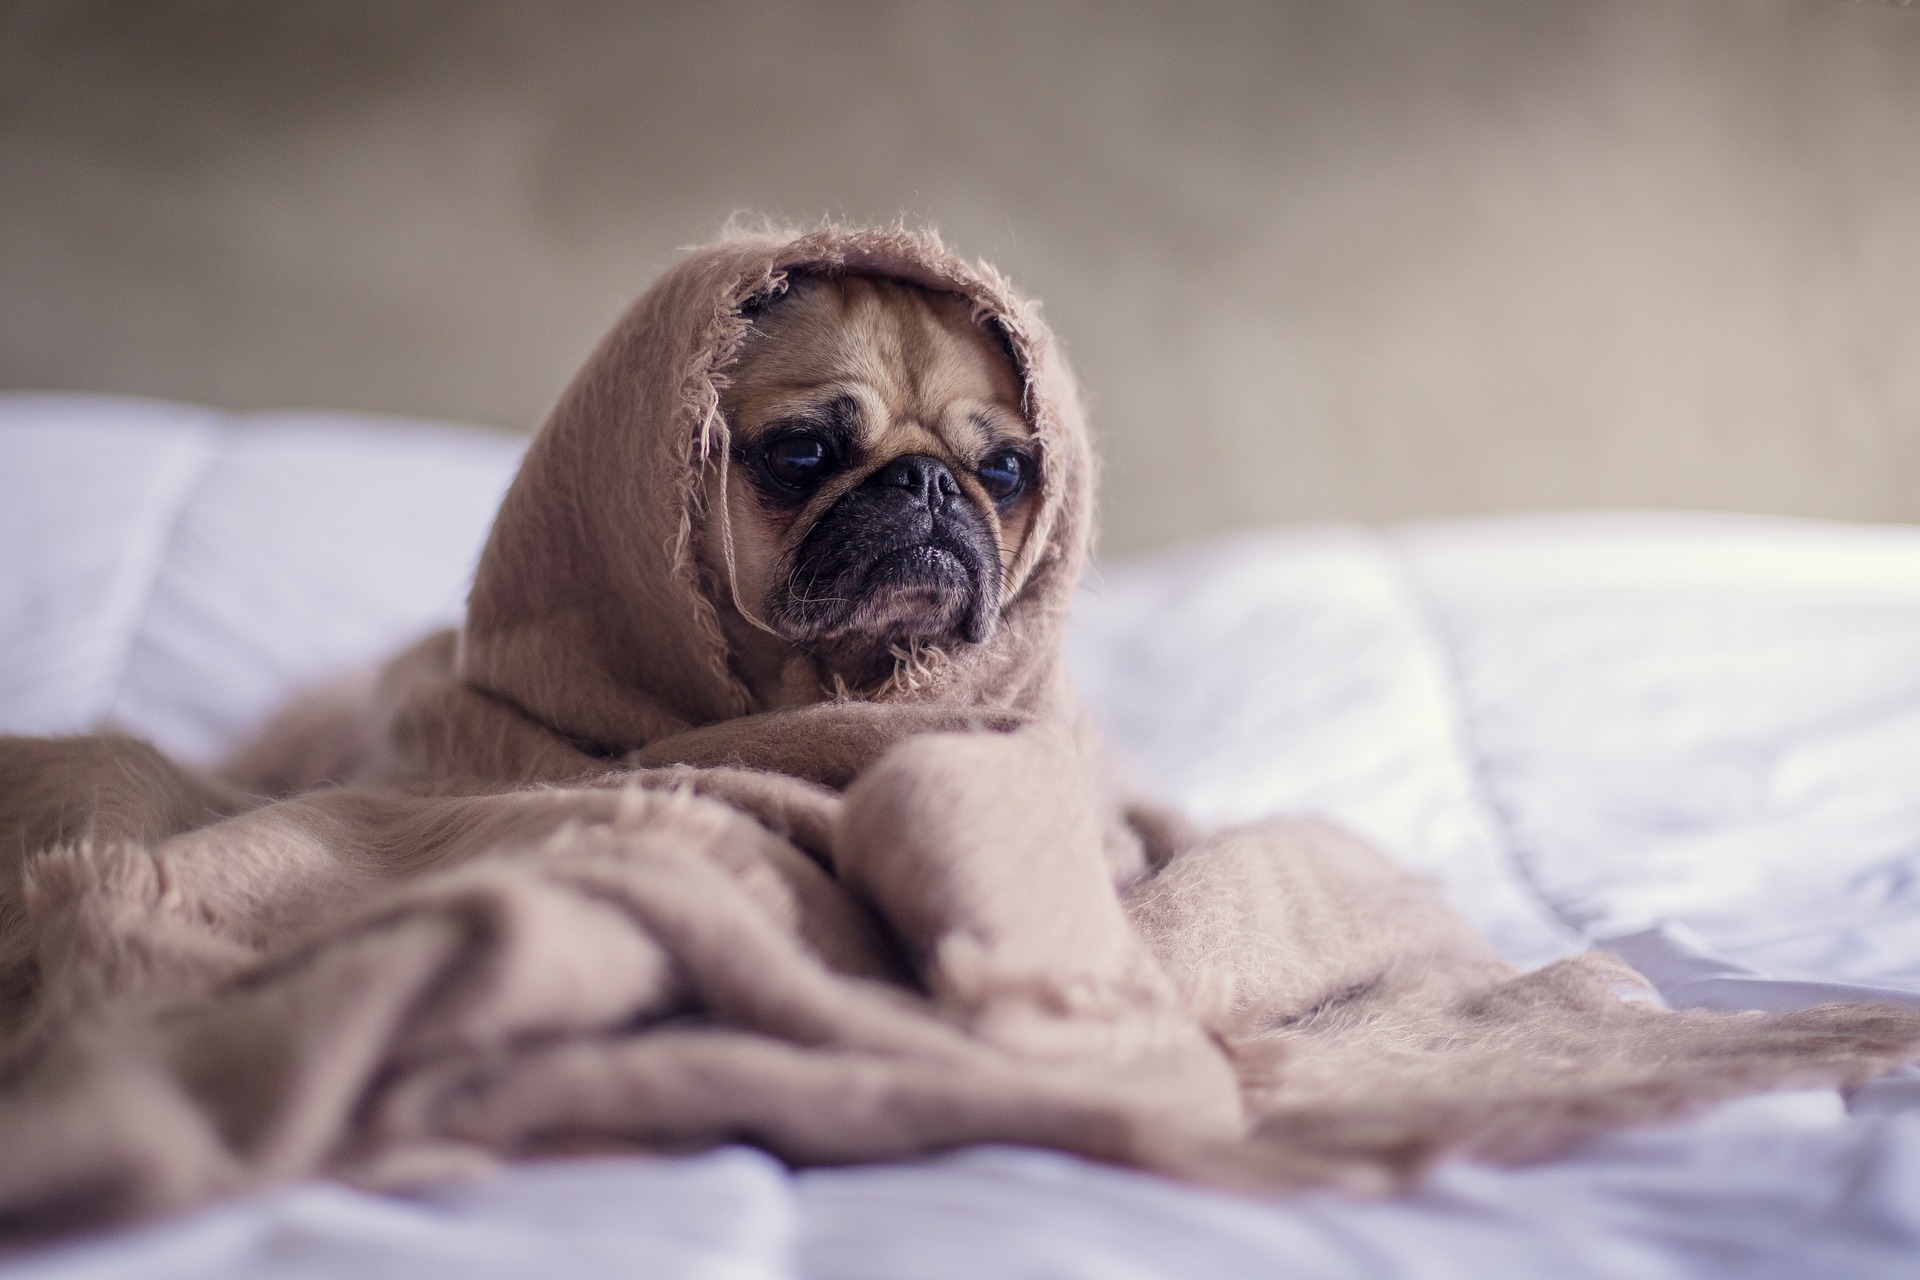 pug with a cold